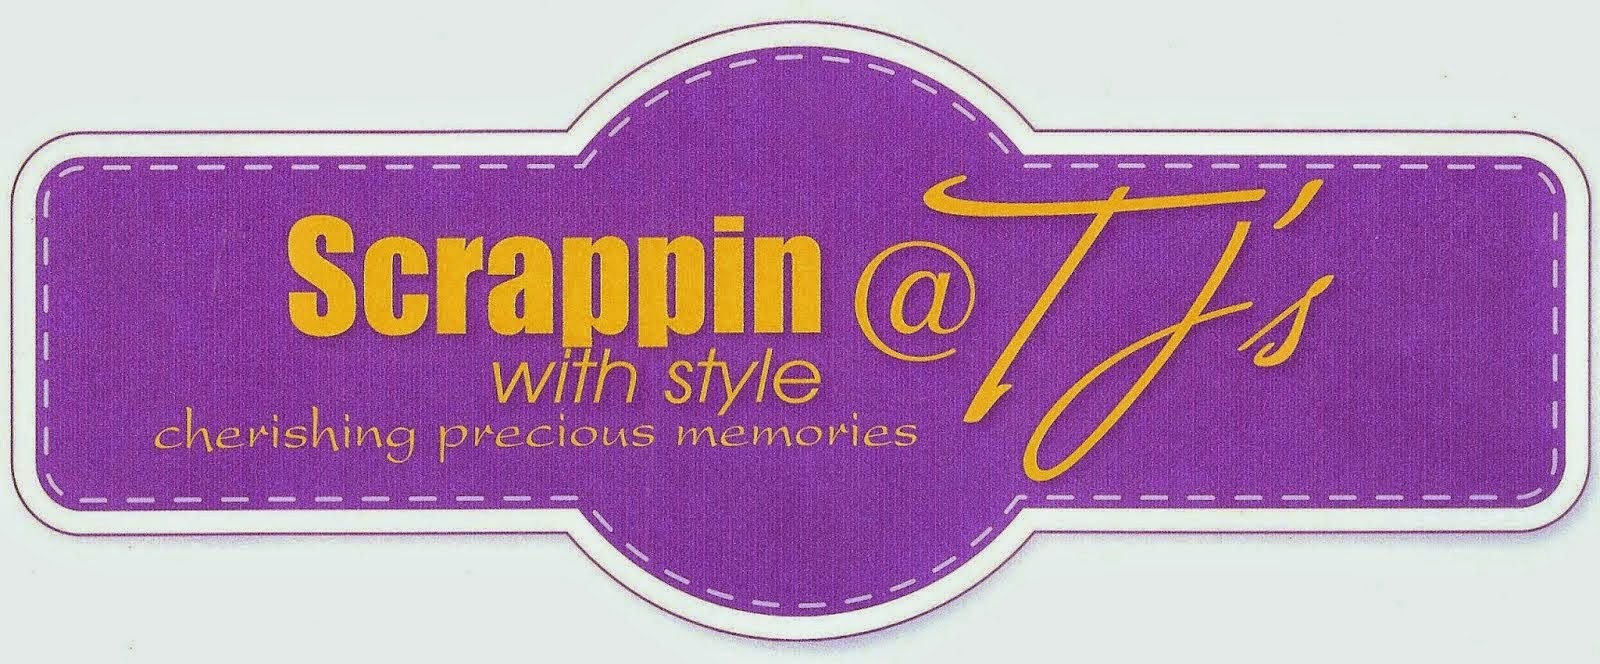 https://www.facebook.com/TjsScrappinWithStyle